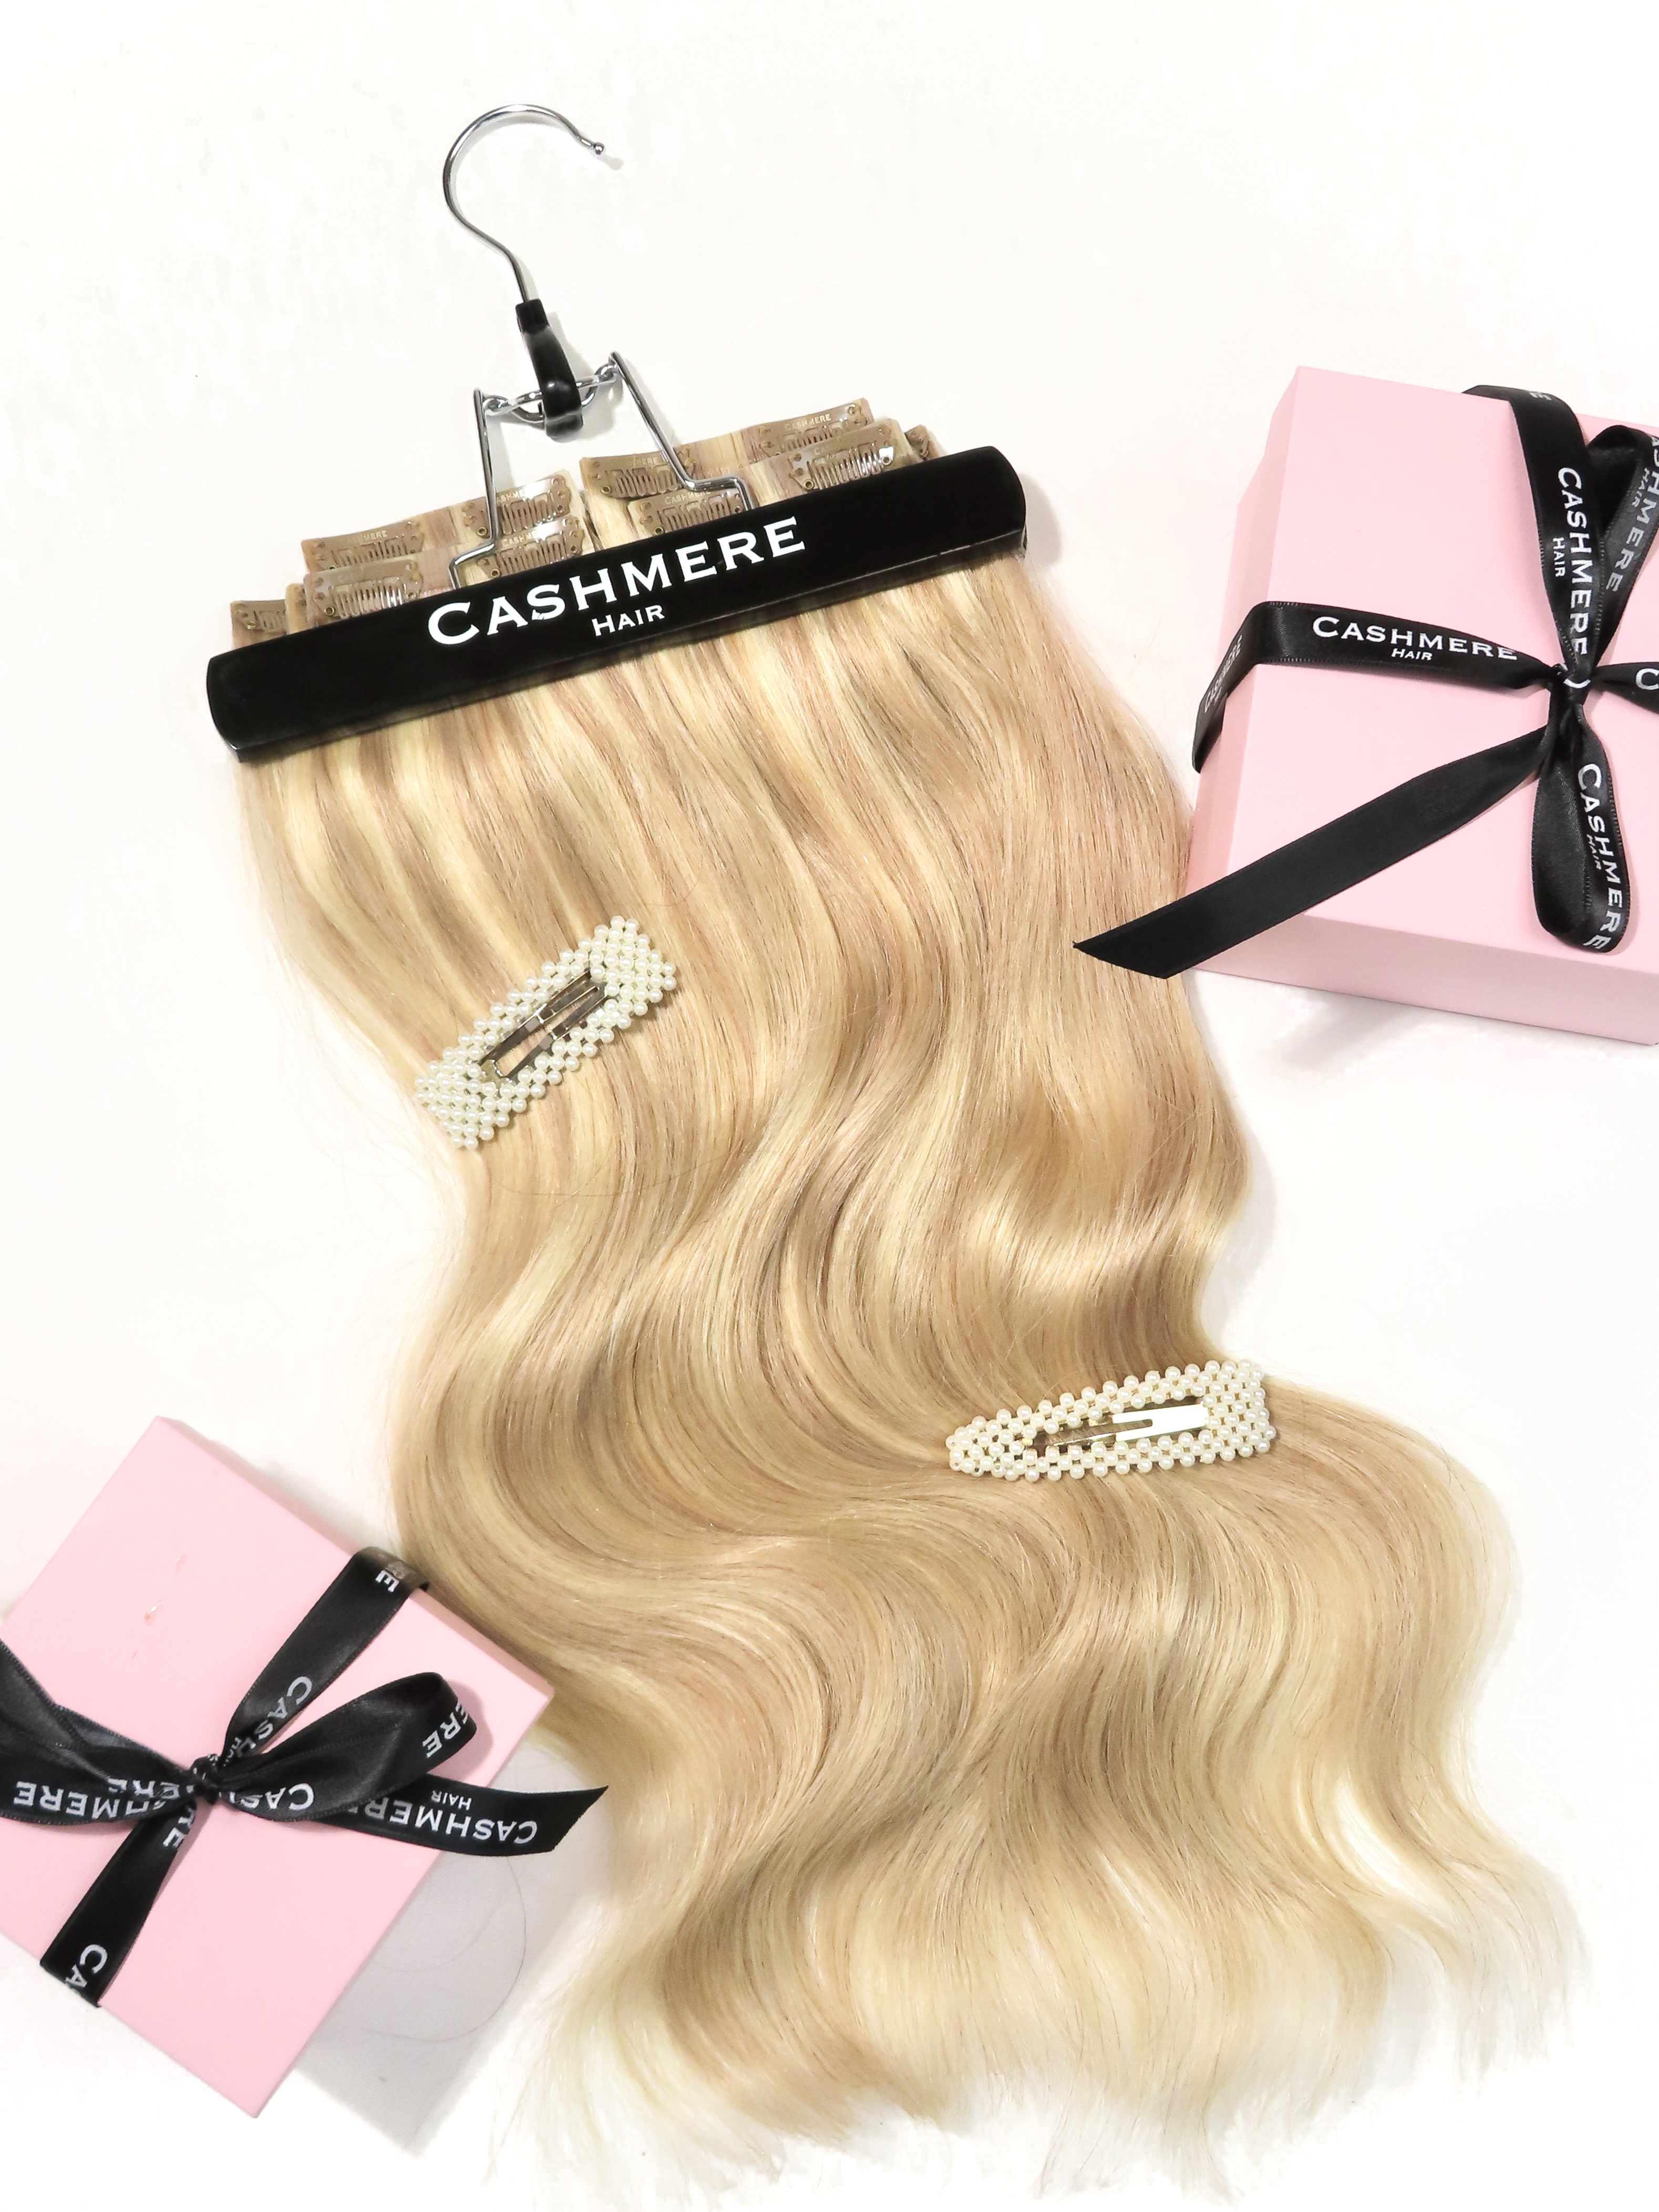 Cashmere hair classic clip-in extensions 